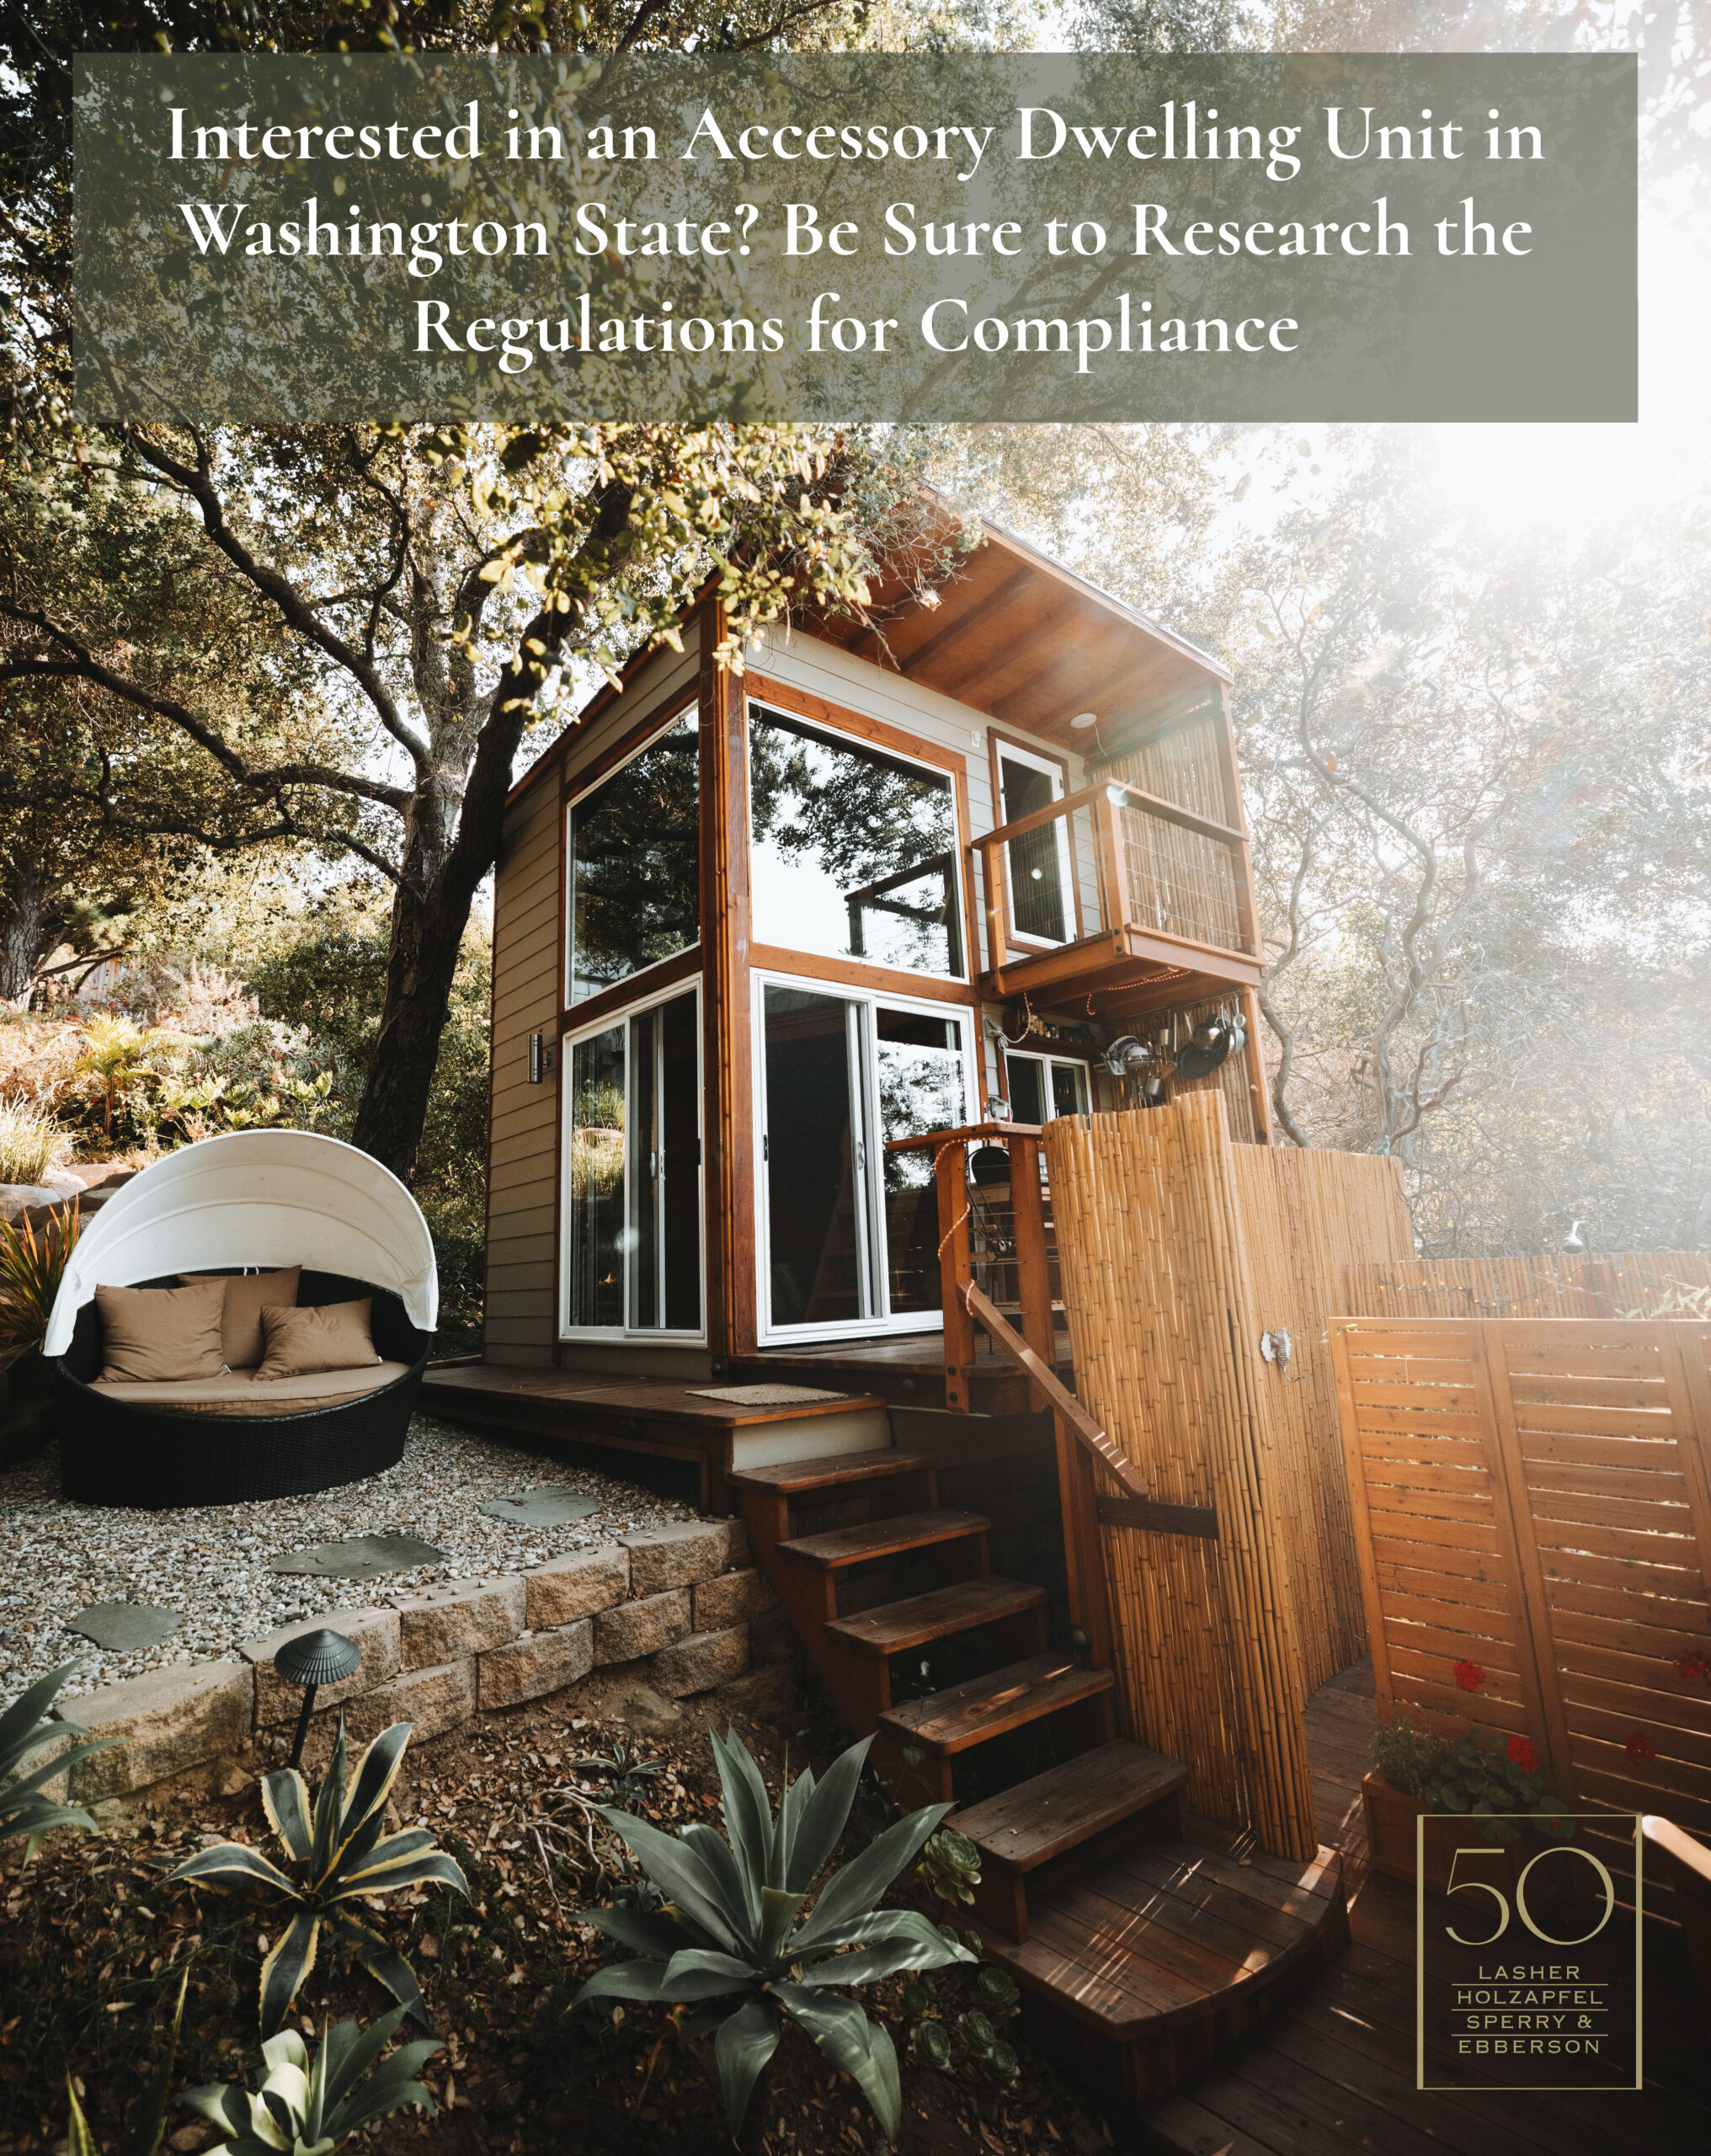 Interested in an Accessory Dwelling Unit in Washington State? Be Sure to Research the Regulations for Compliance